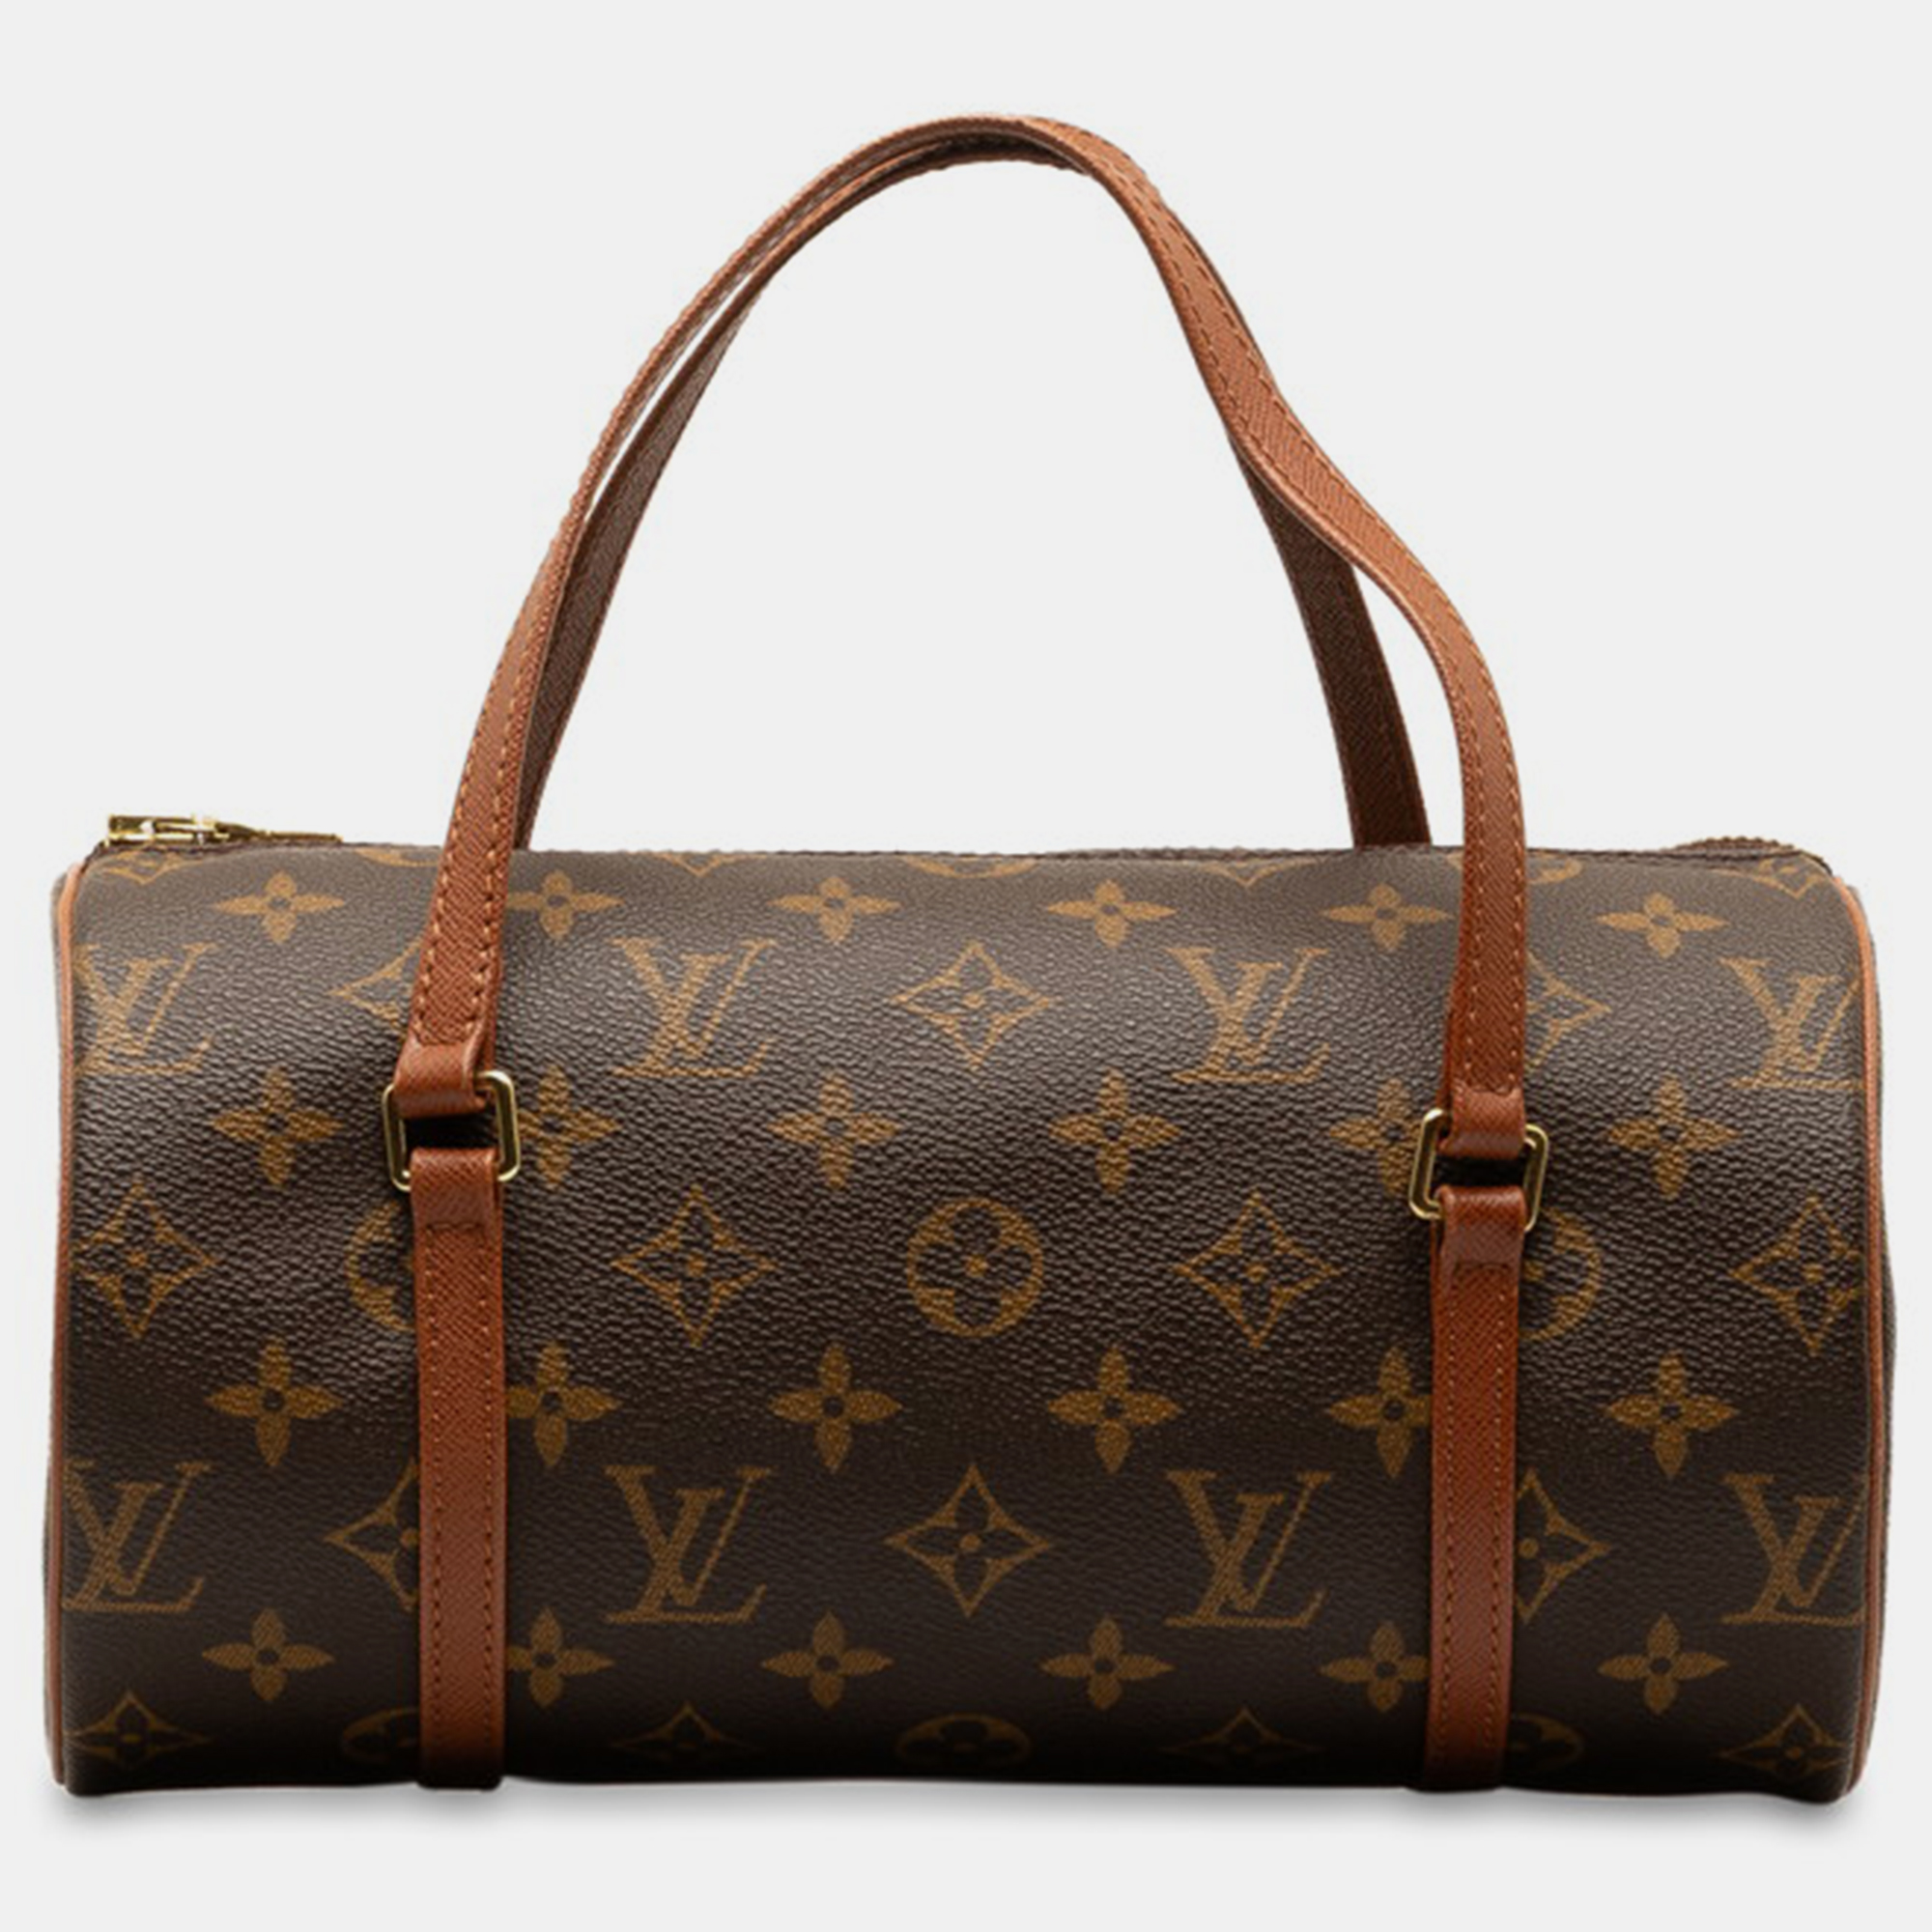 The classy silhouette and the use of durable materials for the exterior bring out the appeal of this Louis Vuitton satchel for women. It promises to be a durable style ally.